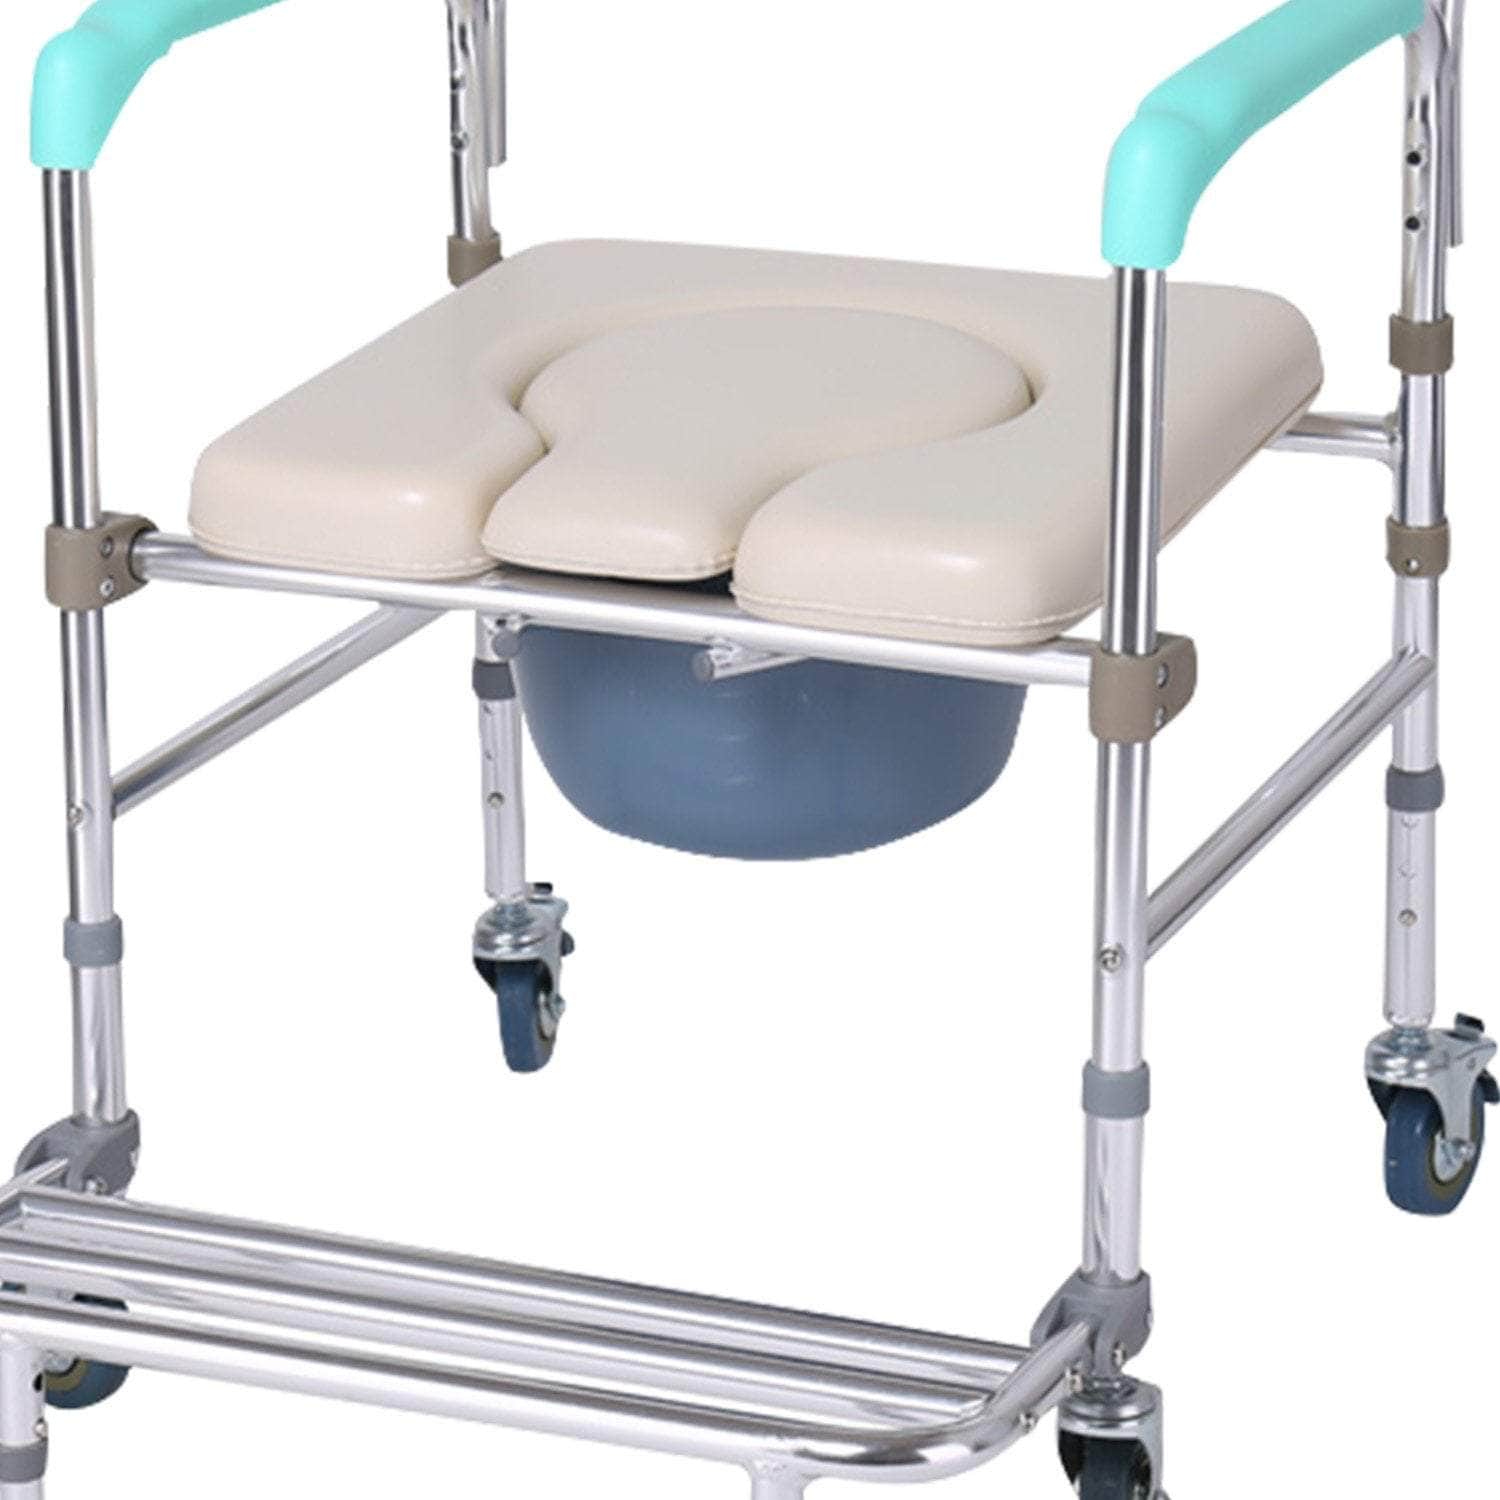 Mobile Commode Chair with Castors